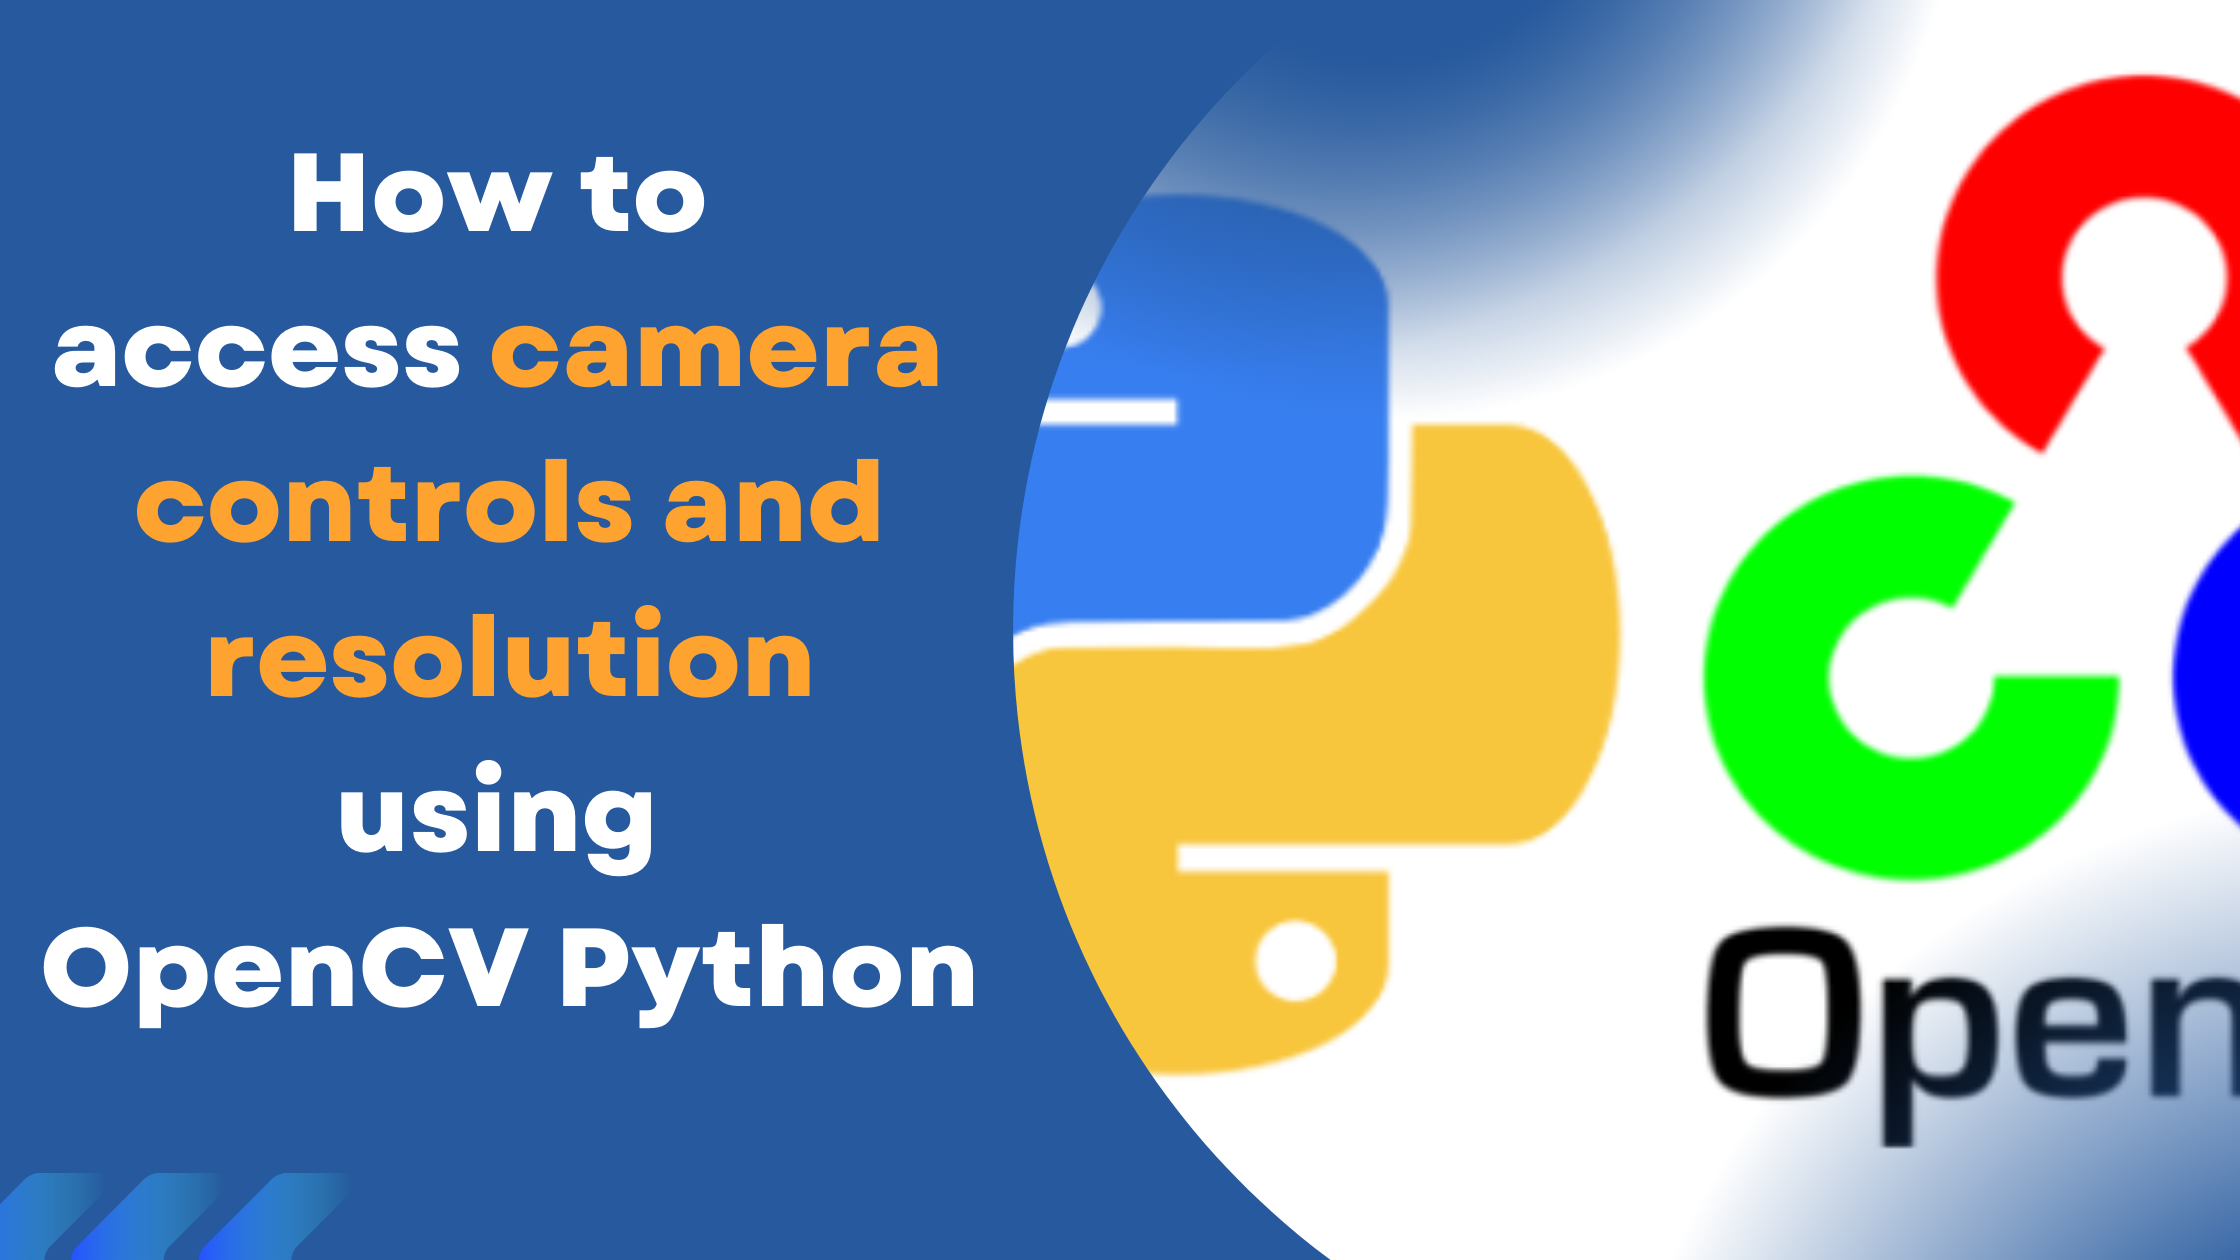 How to access camera controls and resolution using OpenCV Python